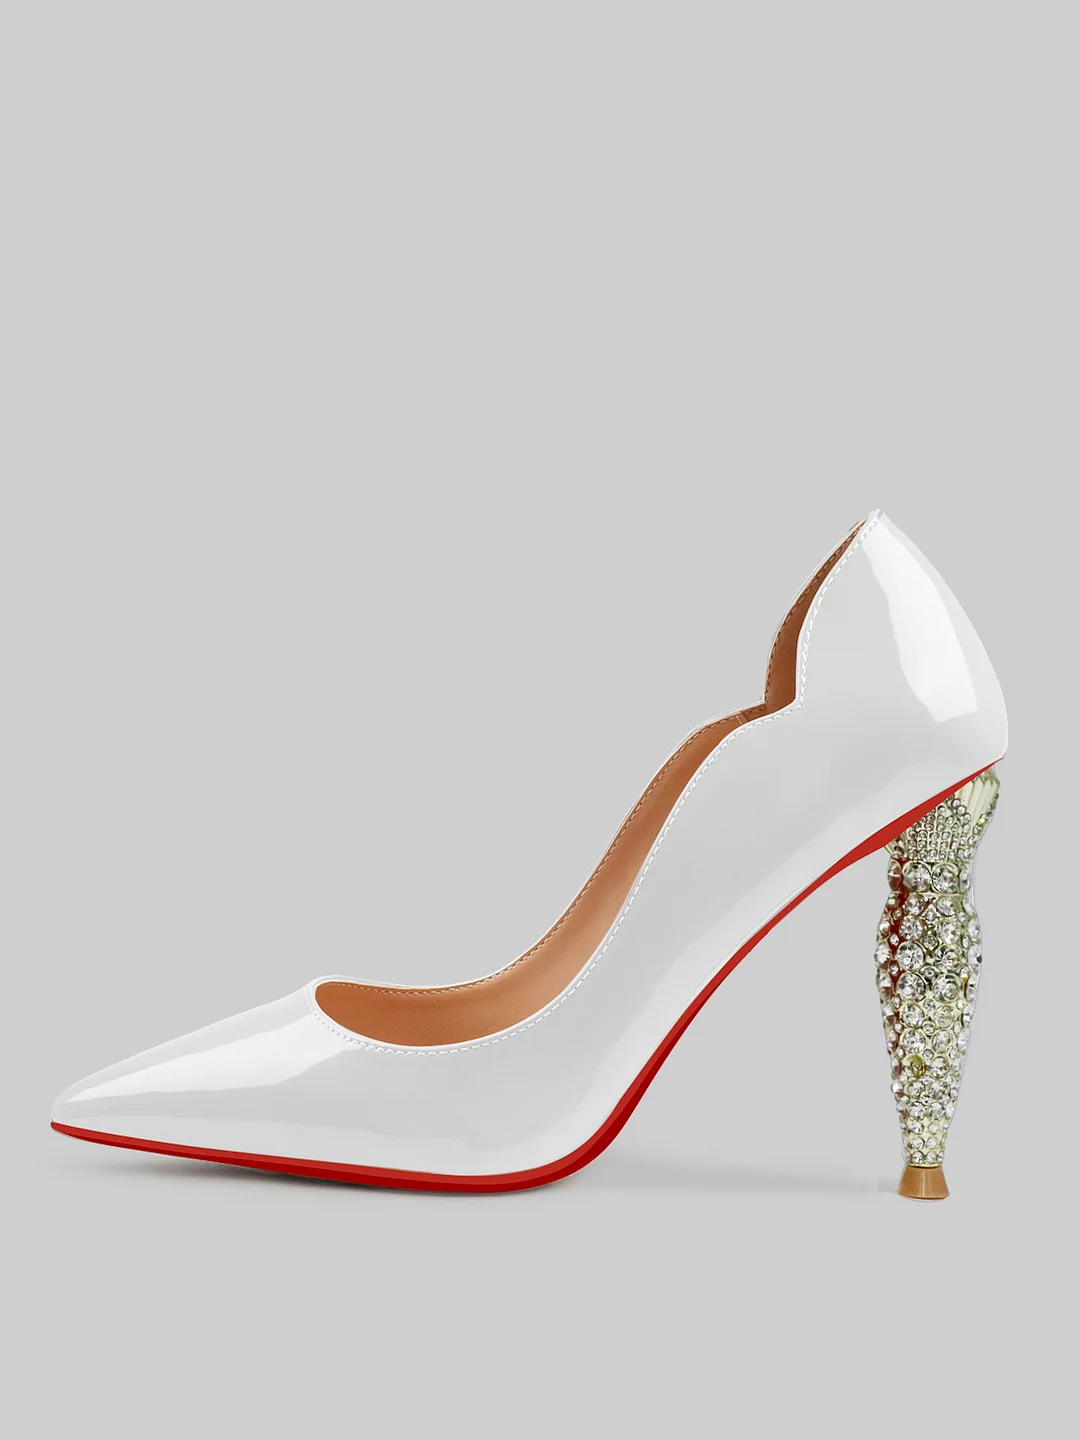 3.94 Inch Women's Classic Pointed Toe Diamond Heel Red Sole High Heels Suitable for Party Wedding Patented High Heels